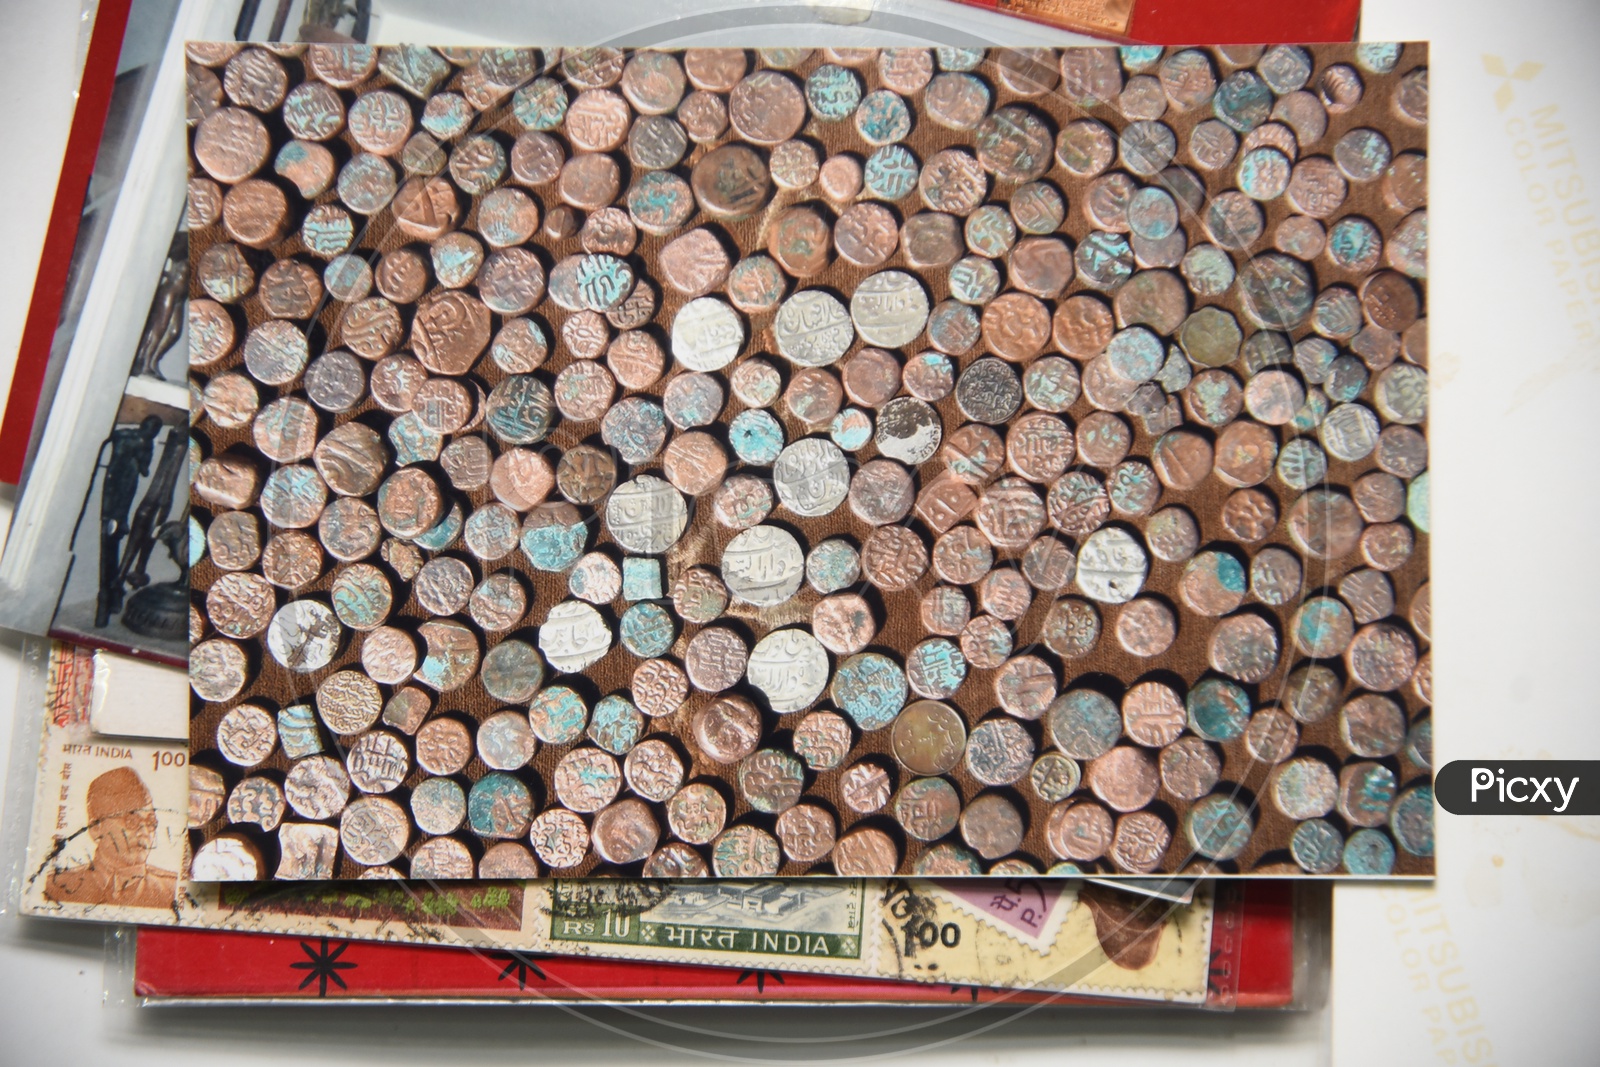 Collection of old coins exhibited